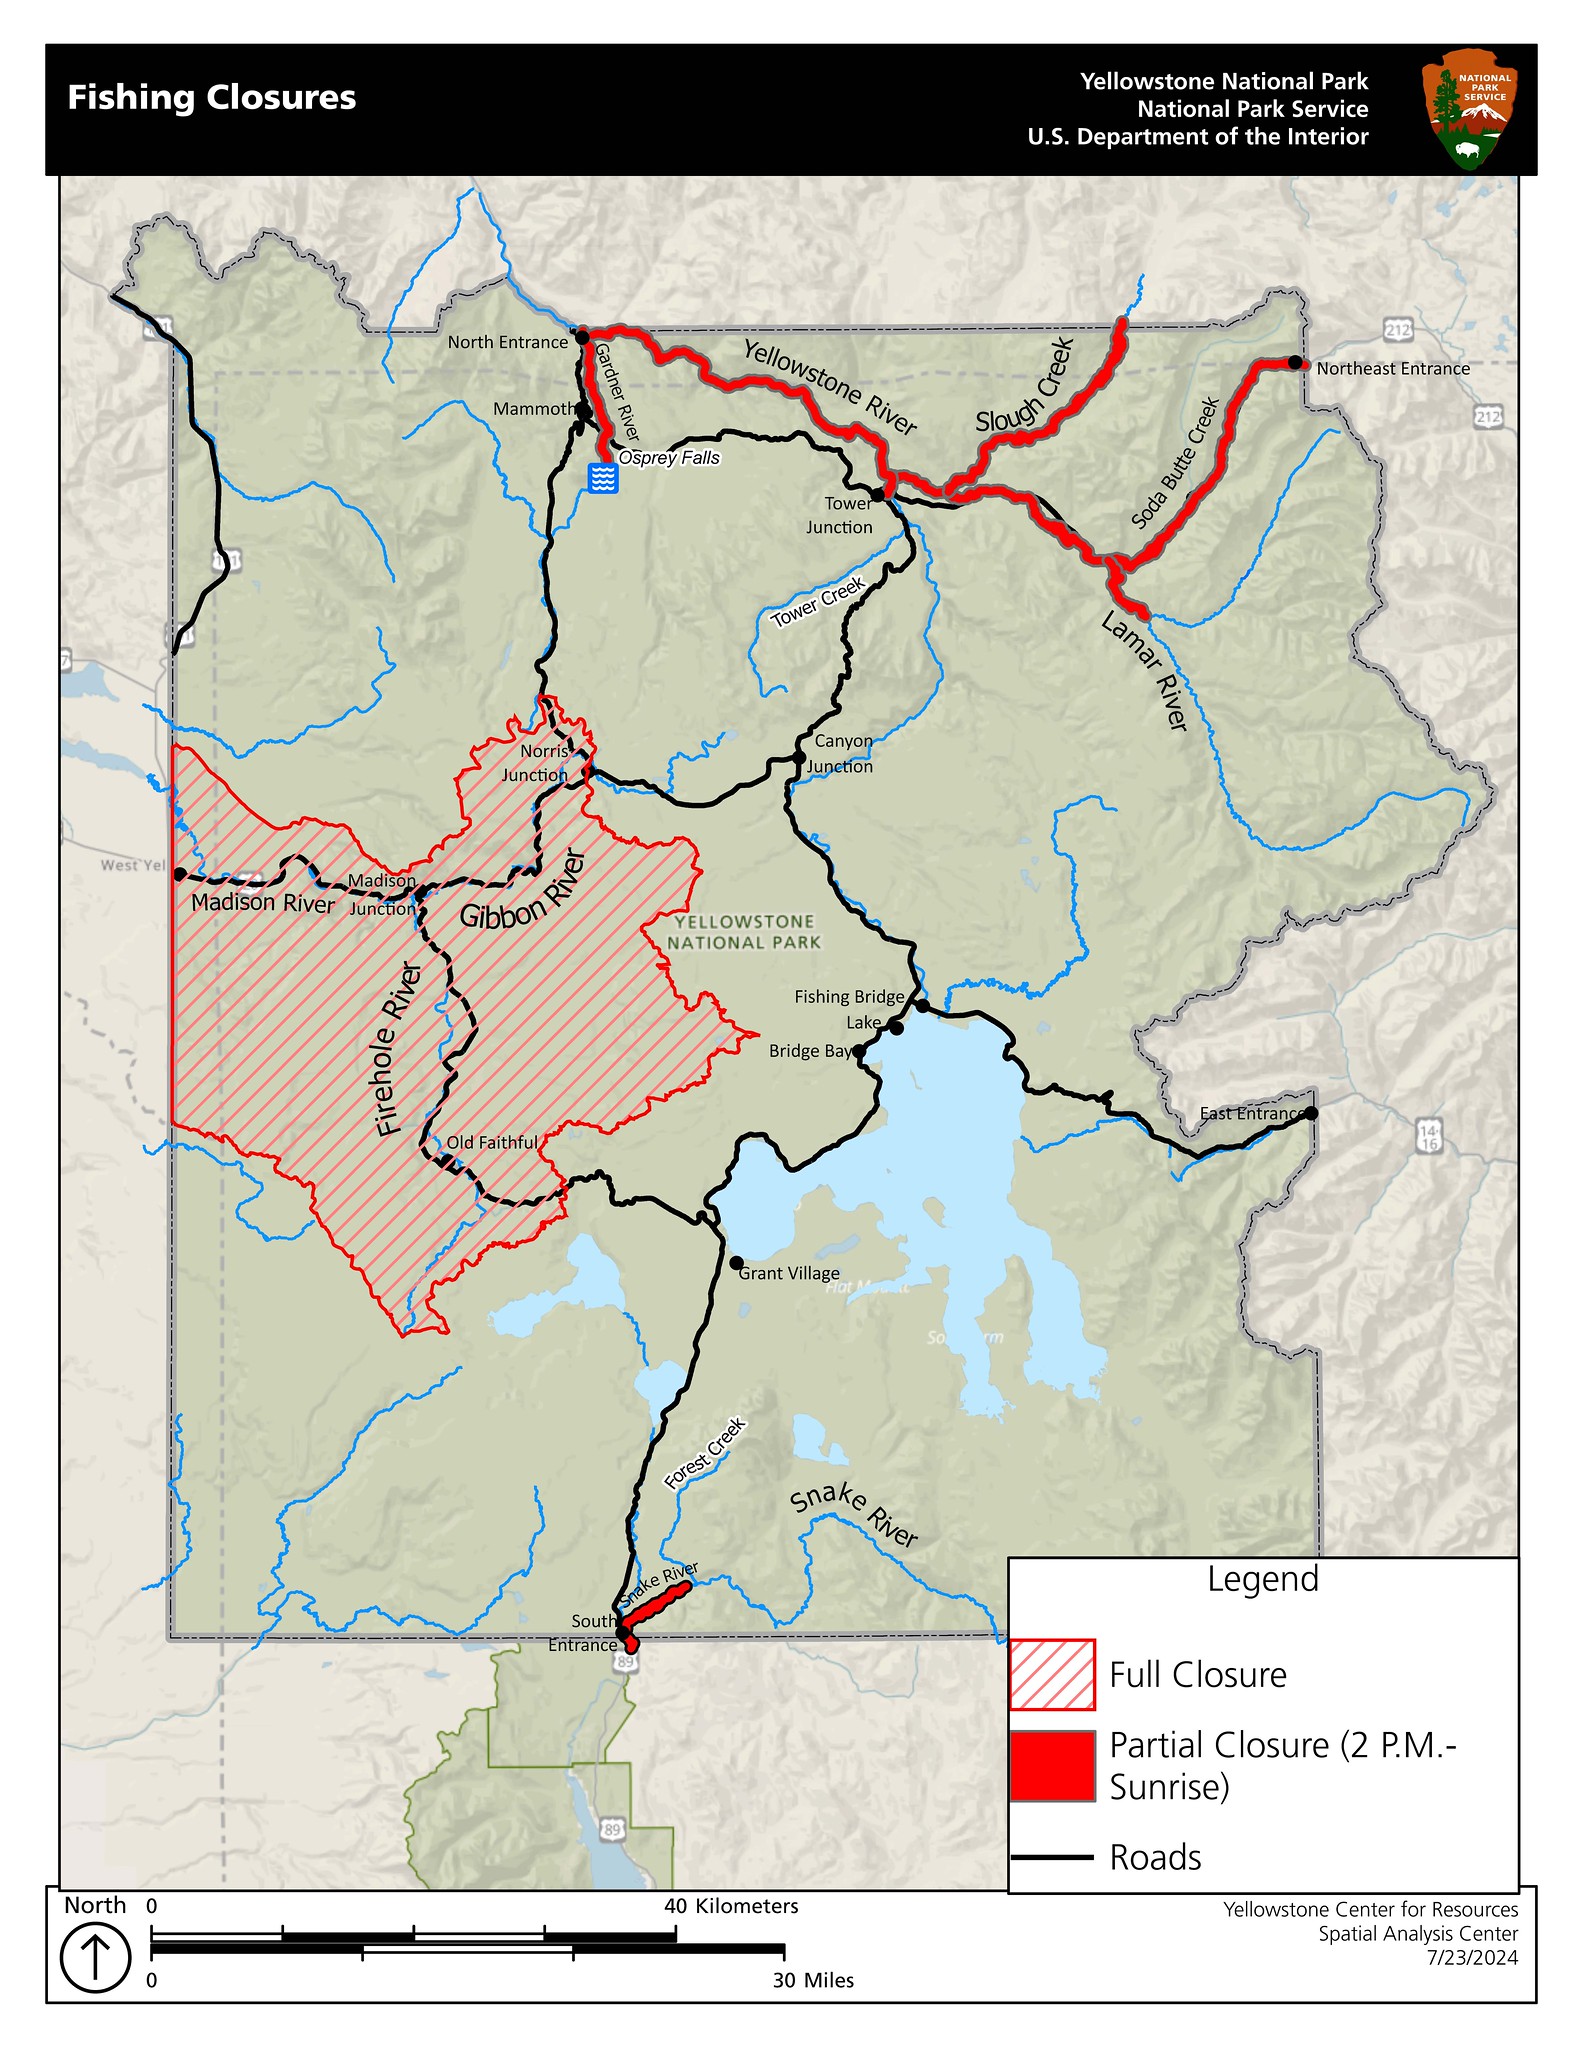 a map of Yellowstone with red markings to indicate which rivers are closed to fishing